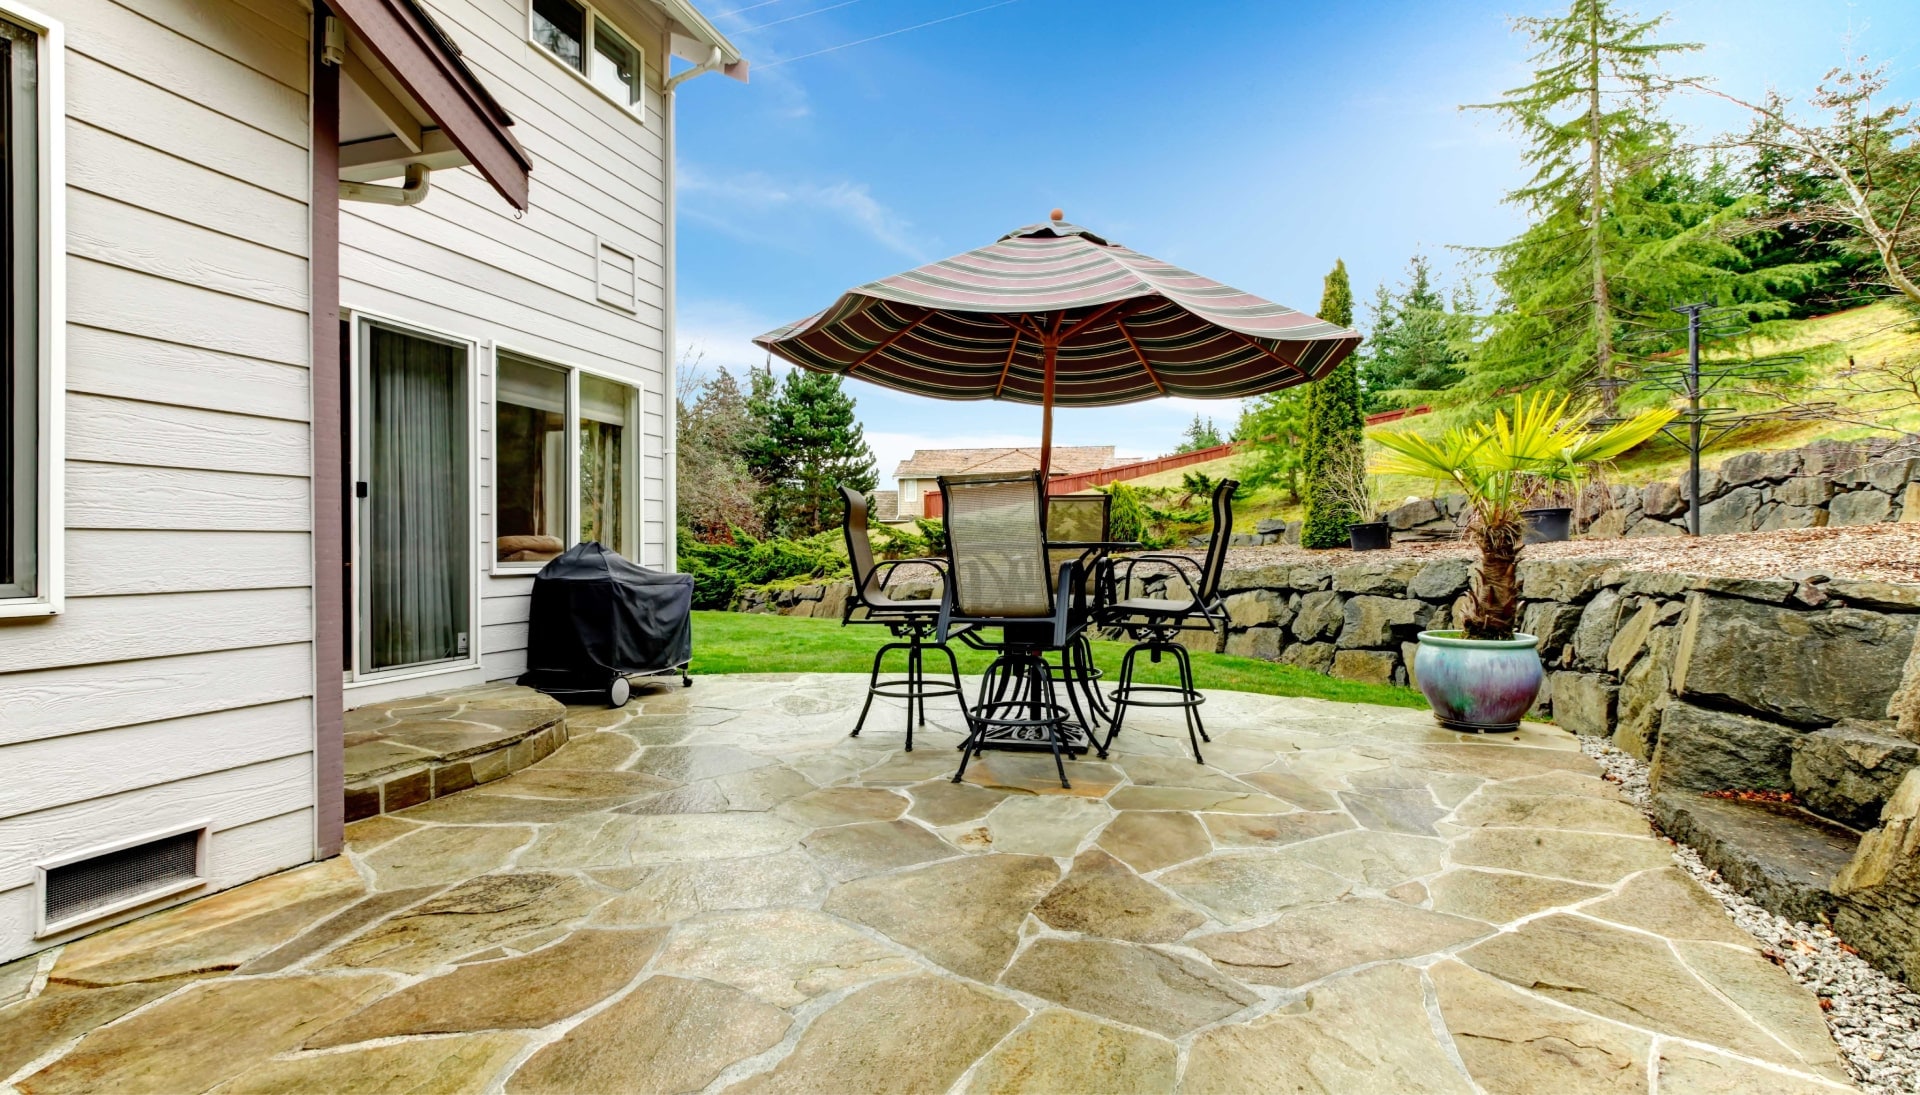 Beautifully Textured and Patterned Concrete Patios in La Crosse, WI